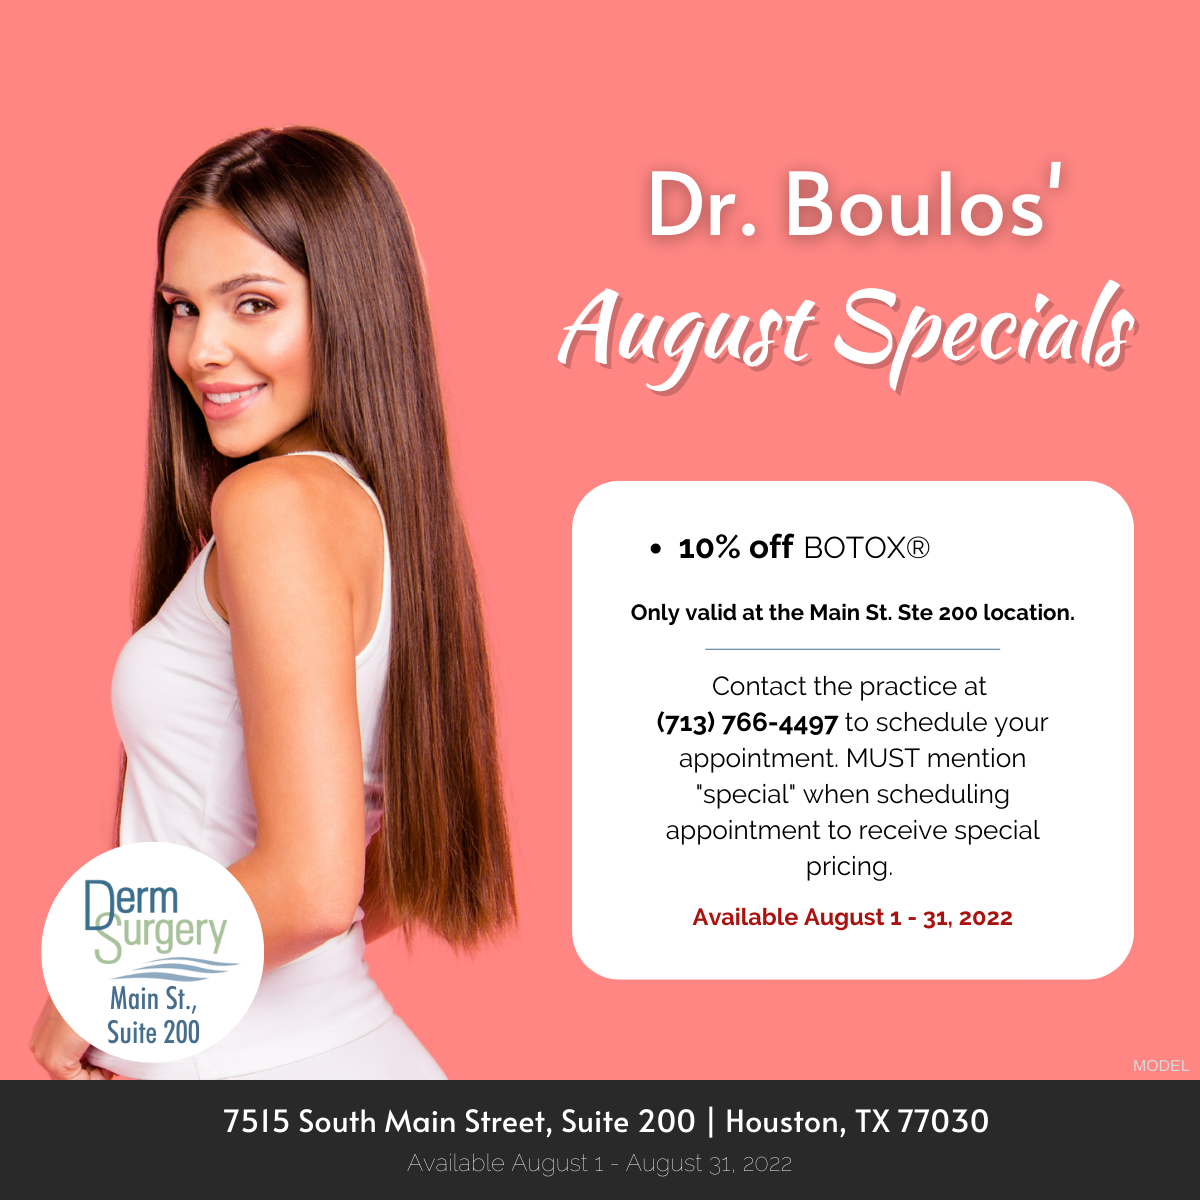 Dr. Boulos' August Specials 2022